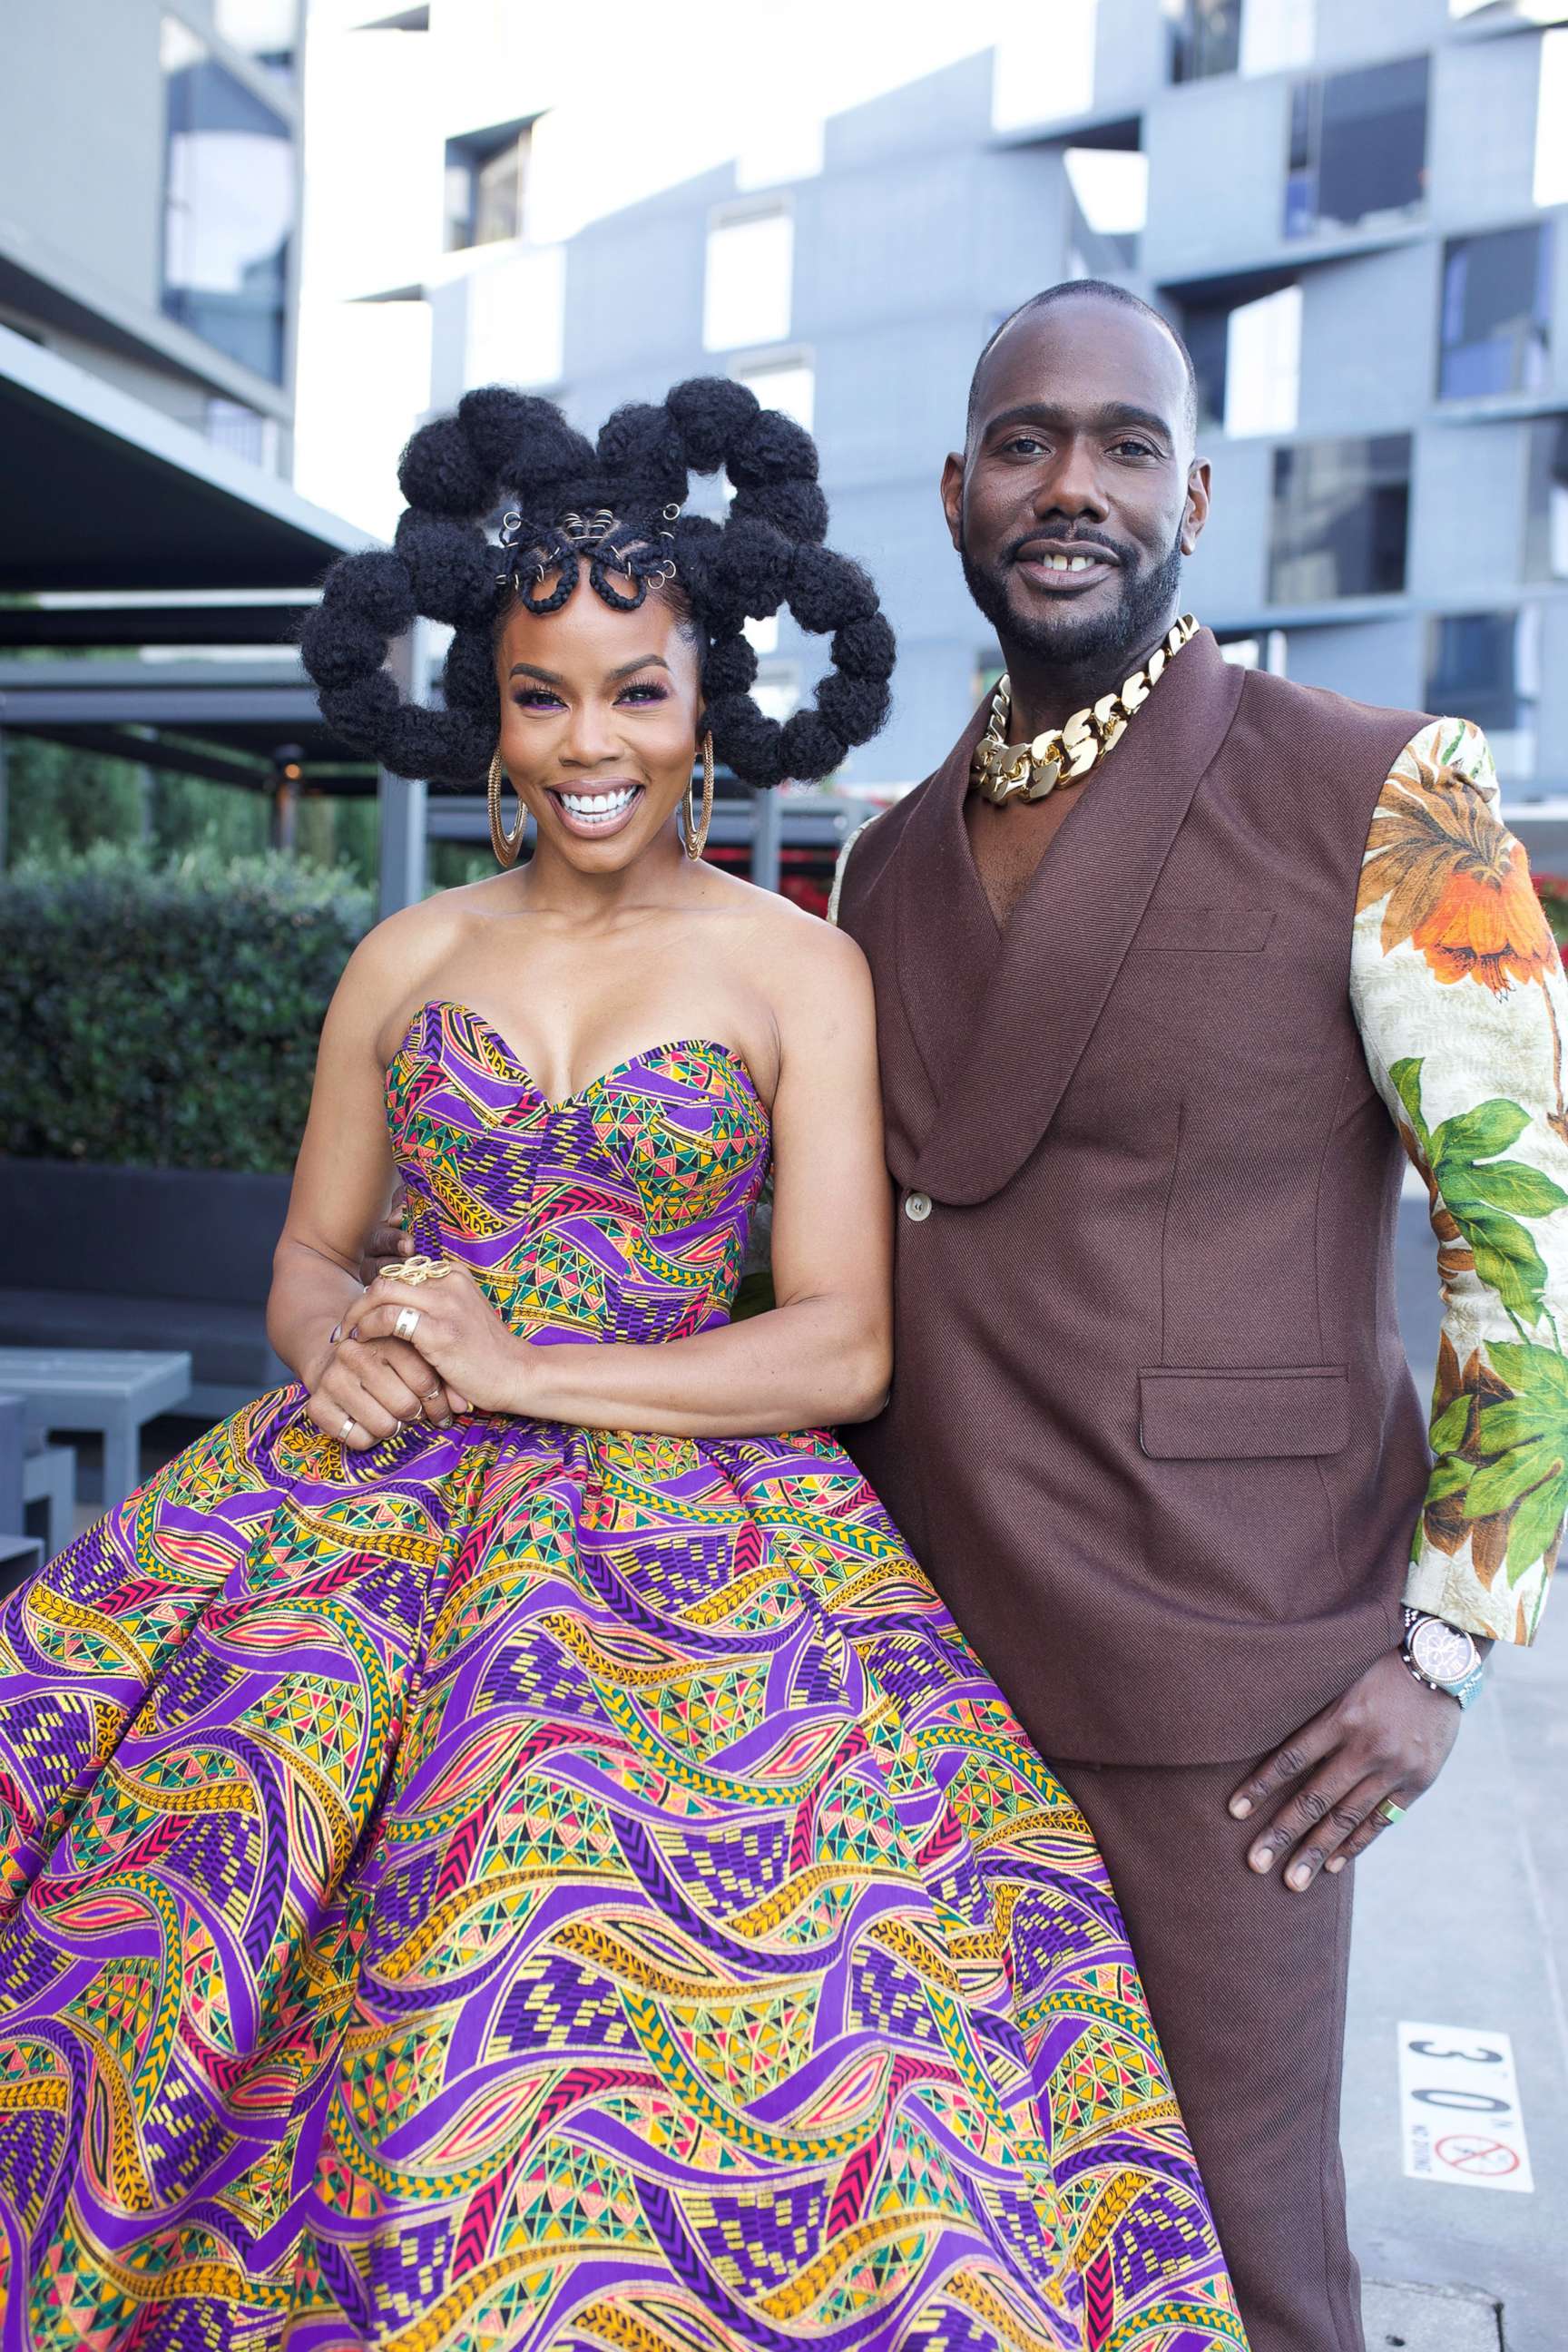 PHOTO: Brandee Evans and Nicco Annan pose for a photo ahead of the 52nd NAACP Image Awards on March 27, 2021, in Los Angeles.